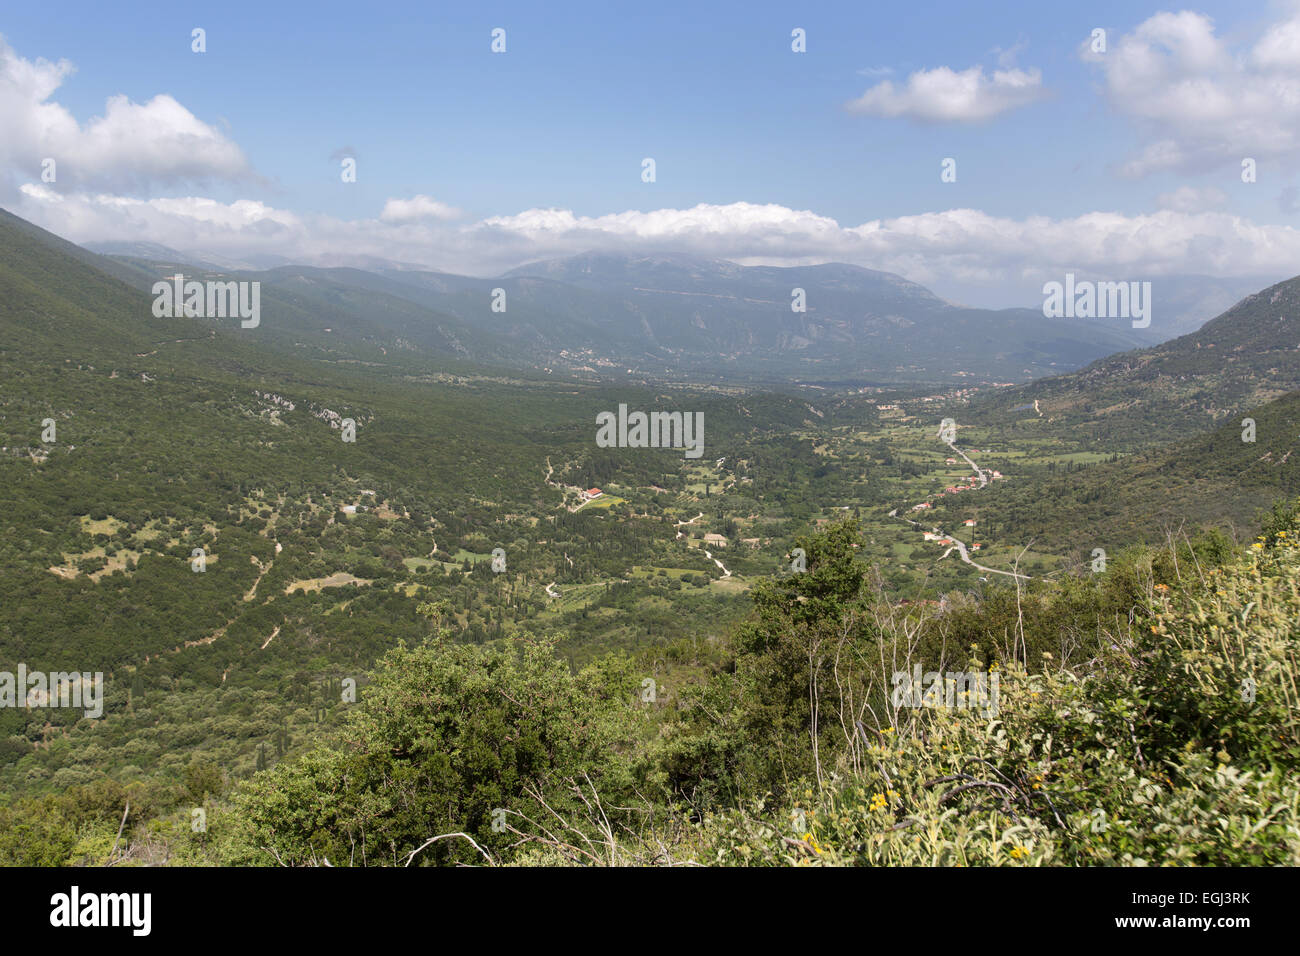 National Park, Kefalonia. Picturesque roadside view of Mount Enos National Park, from east side of Mount Enos. Stock Photo